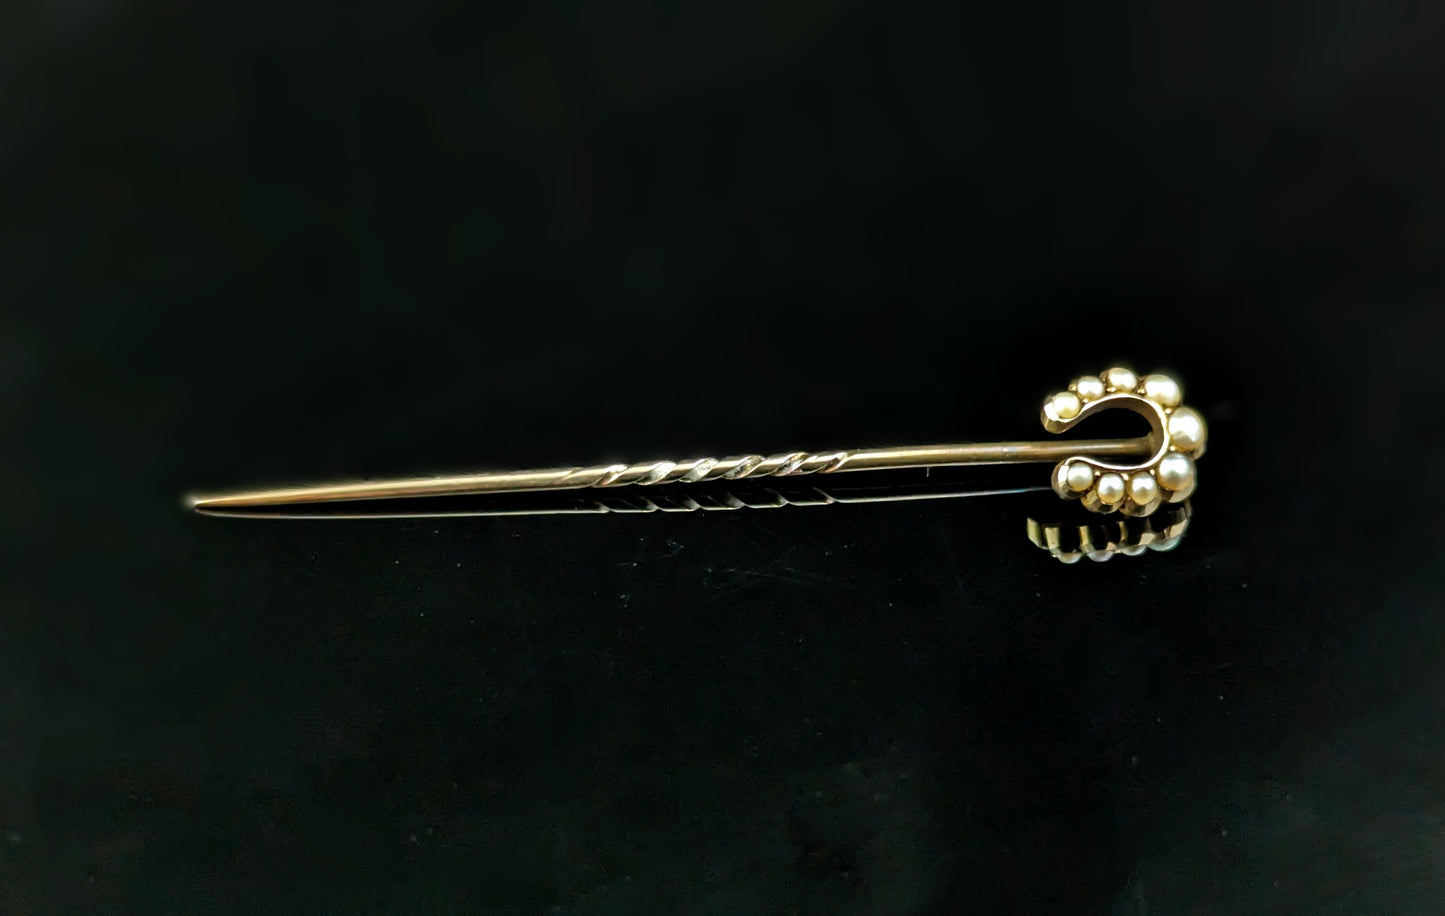 Antique 9ct gold Pearl lucky horseshoe stick pin